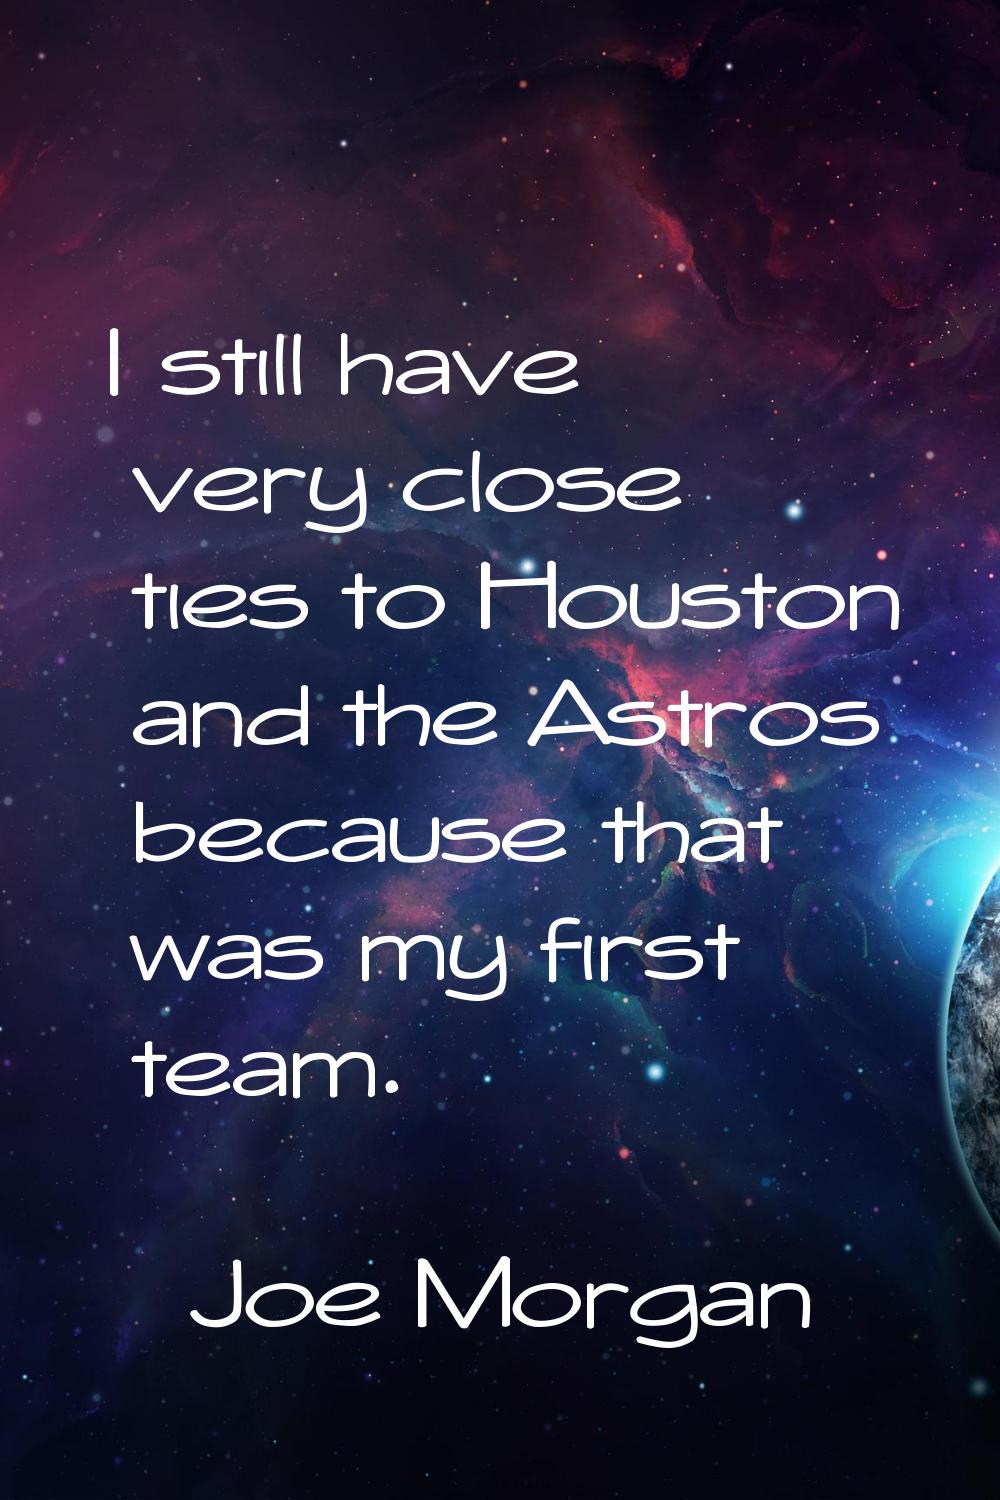 I still have very close ties to Houston and the Astros because that was my first team.